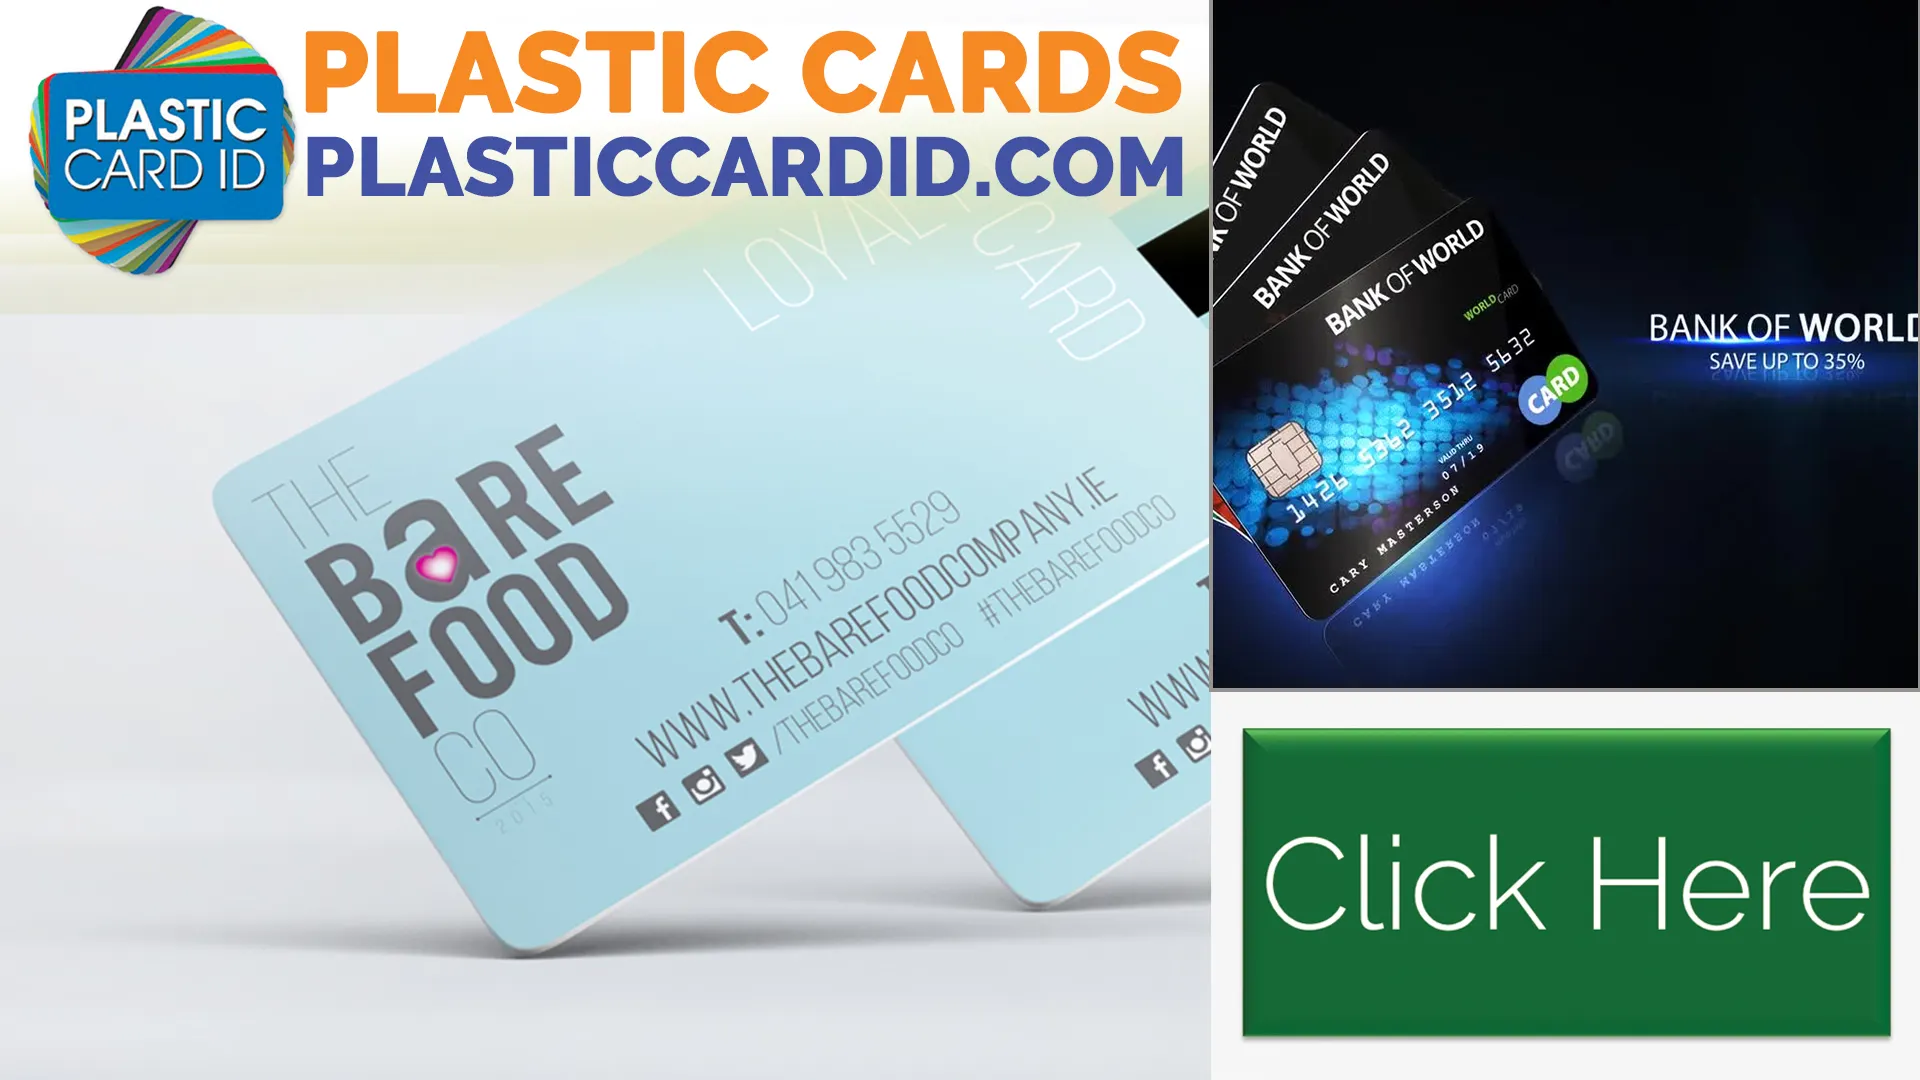 Plastic Card Printers and Refill Supplies